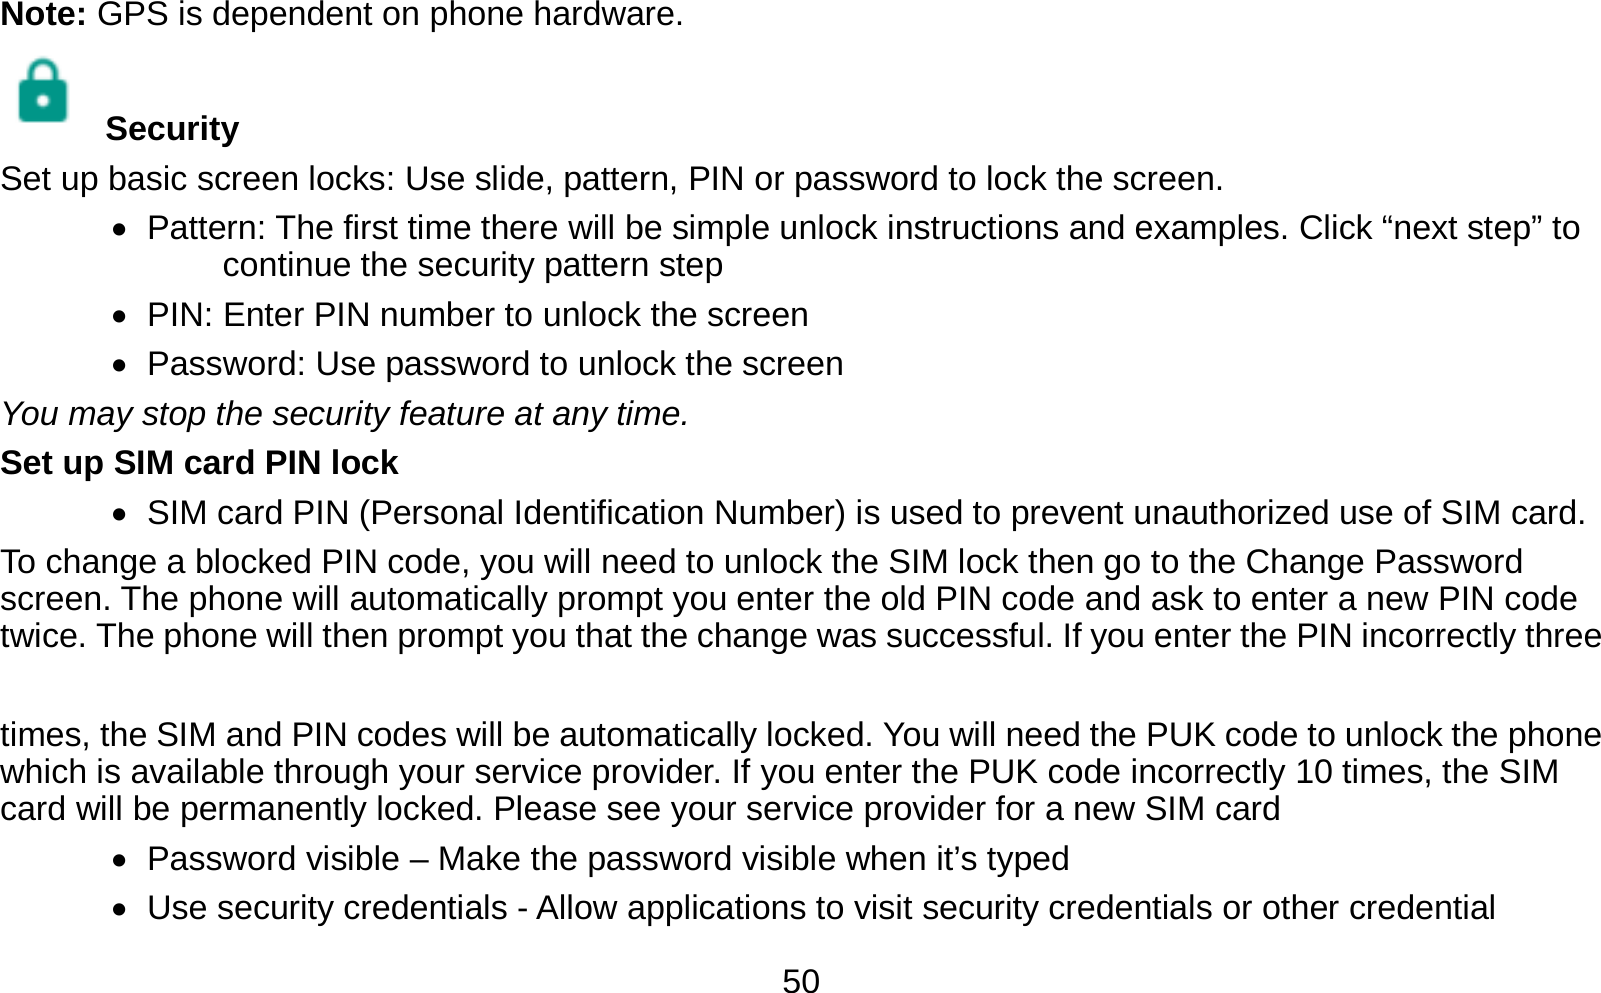   50Note: GPS is dependent on phone hardware.  Security  Set up basic screen locks: Use slide, pattern, PIN or password to lock the screen.      Pattern: The first time there will be simple unlock instructions and examples. Click “next step” to continue the security pattern step    PIN: Enter PIN number to unlock the screen    Password: Use password to unlock the screen You may stop the security feature at any time. Set up SIM card PIN lock    SIM card PIN (Personal Identification Number) is used to prevent unauthorized use of SIM card.   To change a blocked PIN code, you will need to unlock the SIM lock then go to the Change Password screen. The phone will automatically prompt you enter the old PIN code and ask to enter a new PIN code twice. The phone will then prompt you that the change was successful. If you enter the PIN incorrectly three    times, the SIM and PIN codes will be automatically locked. You will need the PUK code to unlock the phone which is available through your service provider. If you enter the PUK code incorrectly 10 times, the SIM card will be permanently locked. Please see your service provider for a new SIM card    Password visible – Make the password visible when it’s typed    Use security credentials - Allow applications to visit security credentials or other credential 